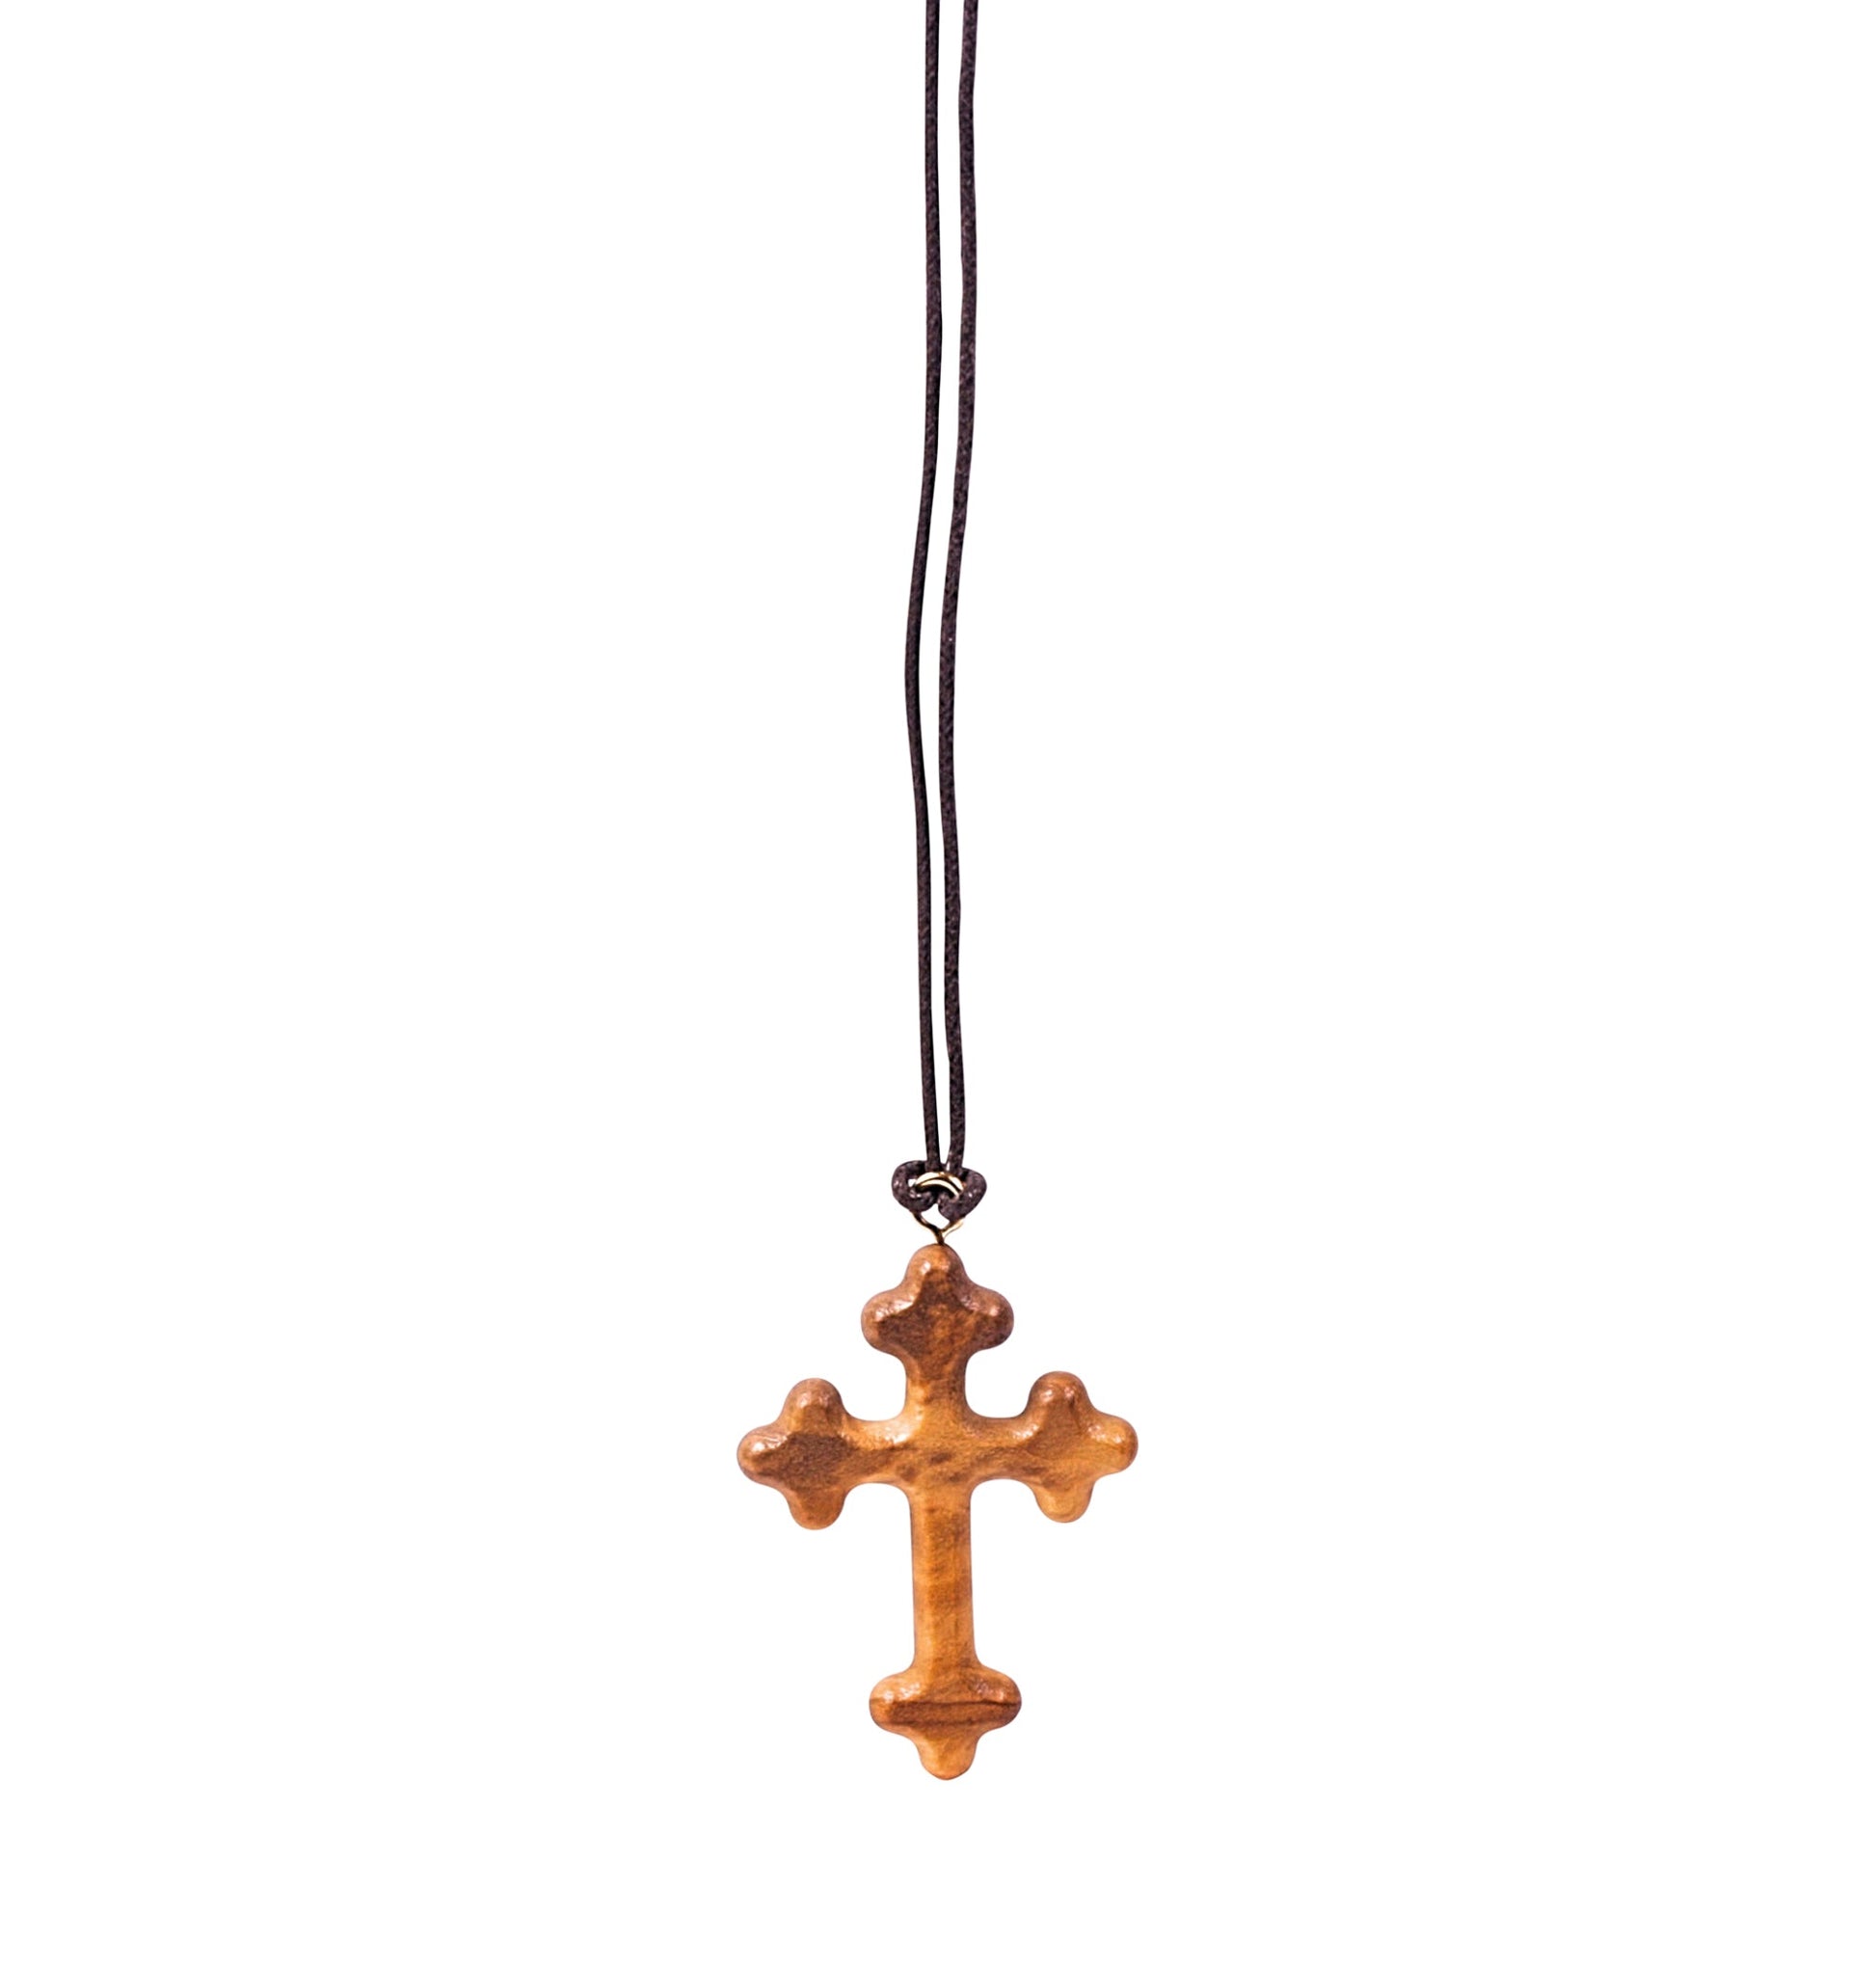 Olive wood orthodox cross pendant with three rounded protrusions on each arm, suspended from a soft cotton cord.